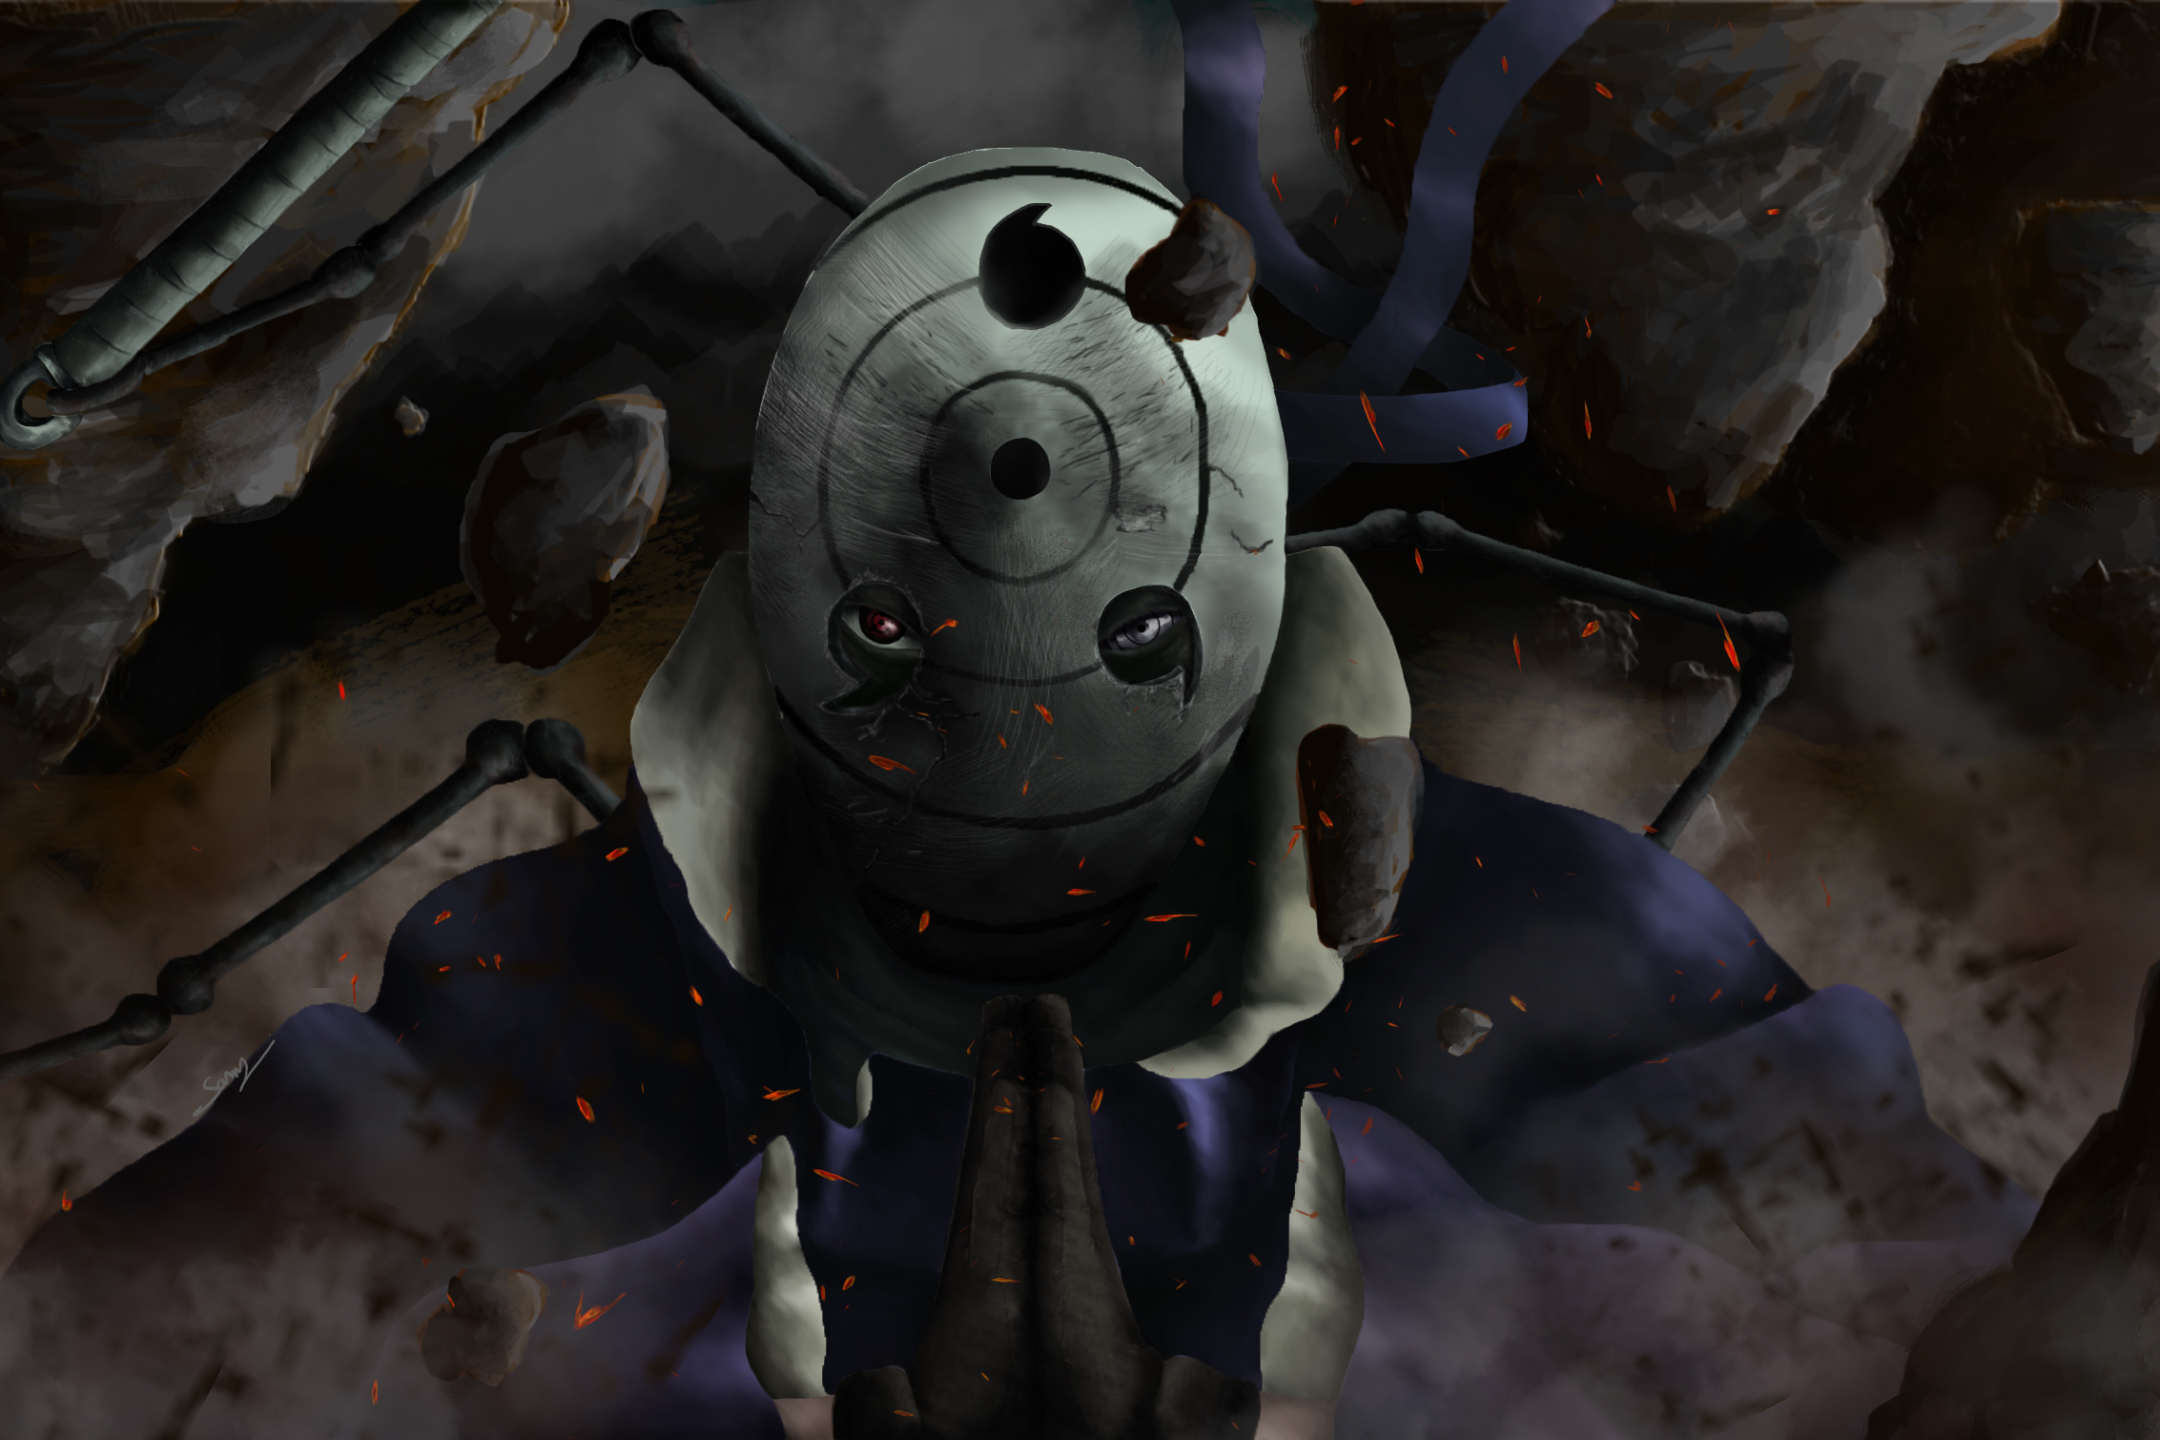 Obito uchiha with sharingan background Wallpapers Download